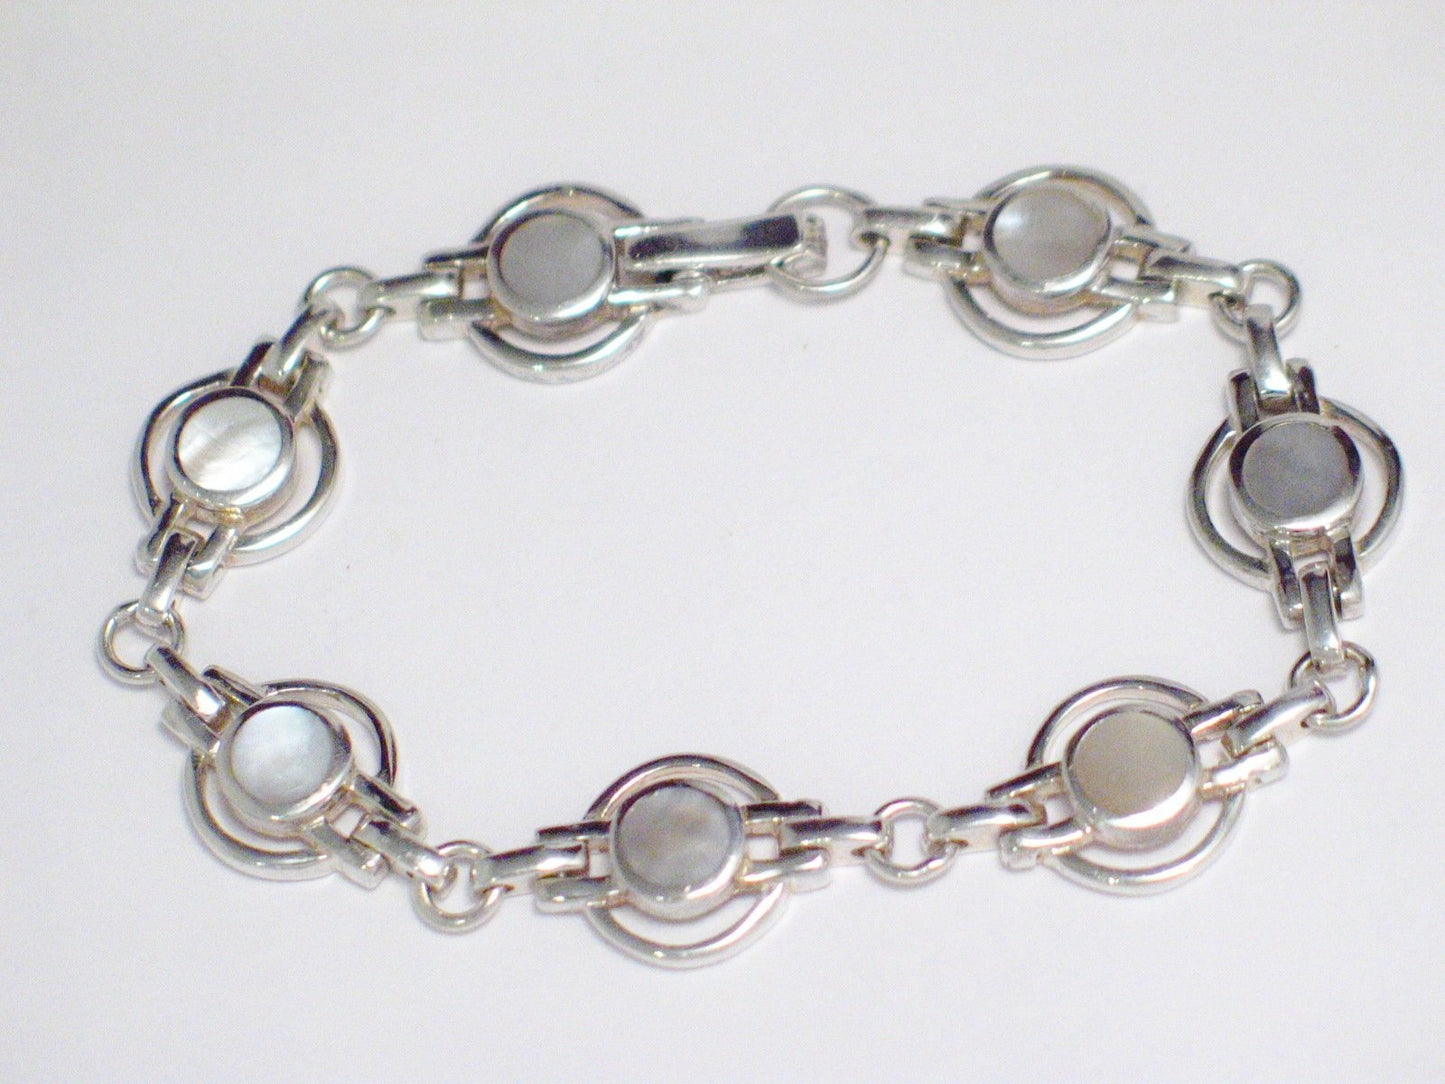 Halo Chain Bracelet Sterling Silver w/ Mother of Pearl Stone Inlay 7" - Blingschlingers Jewelry